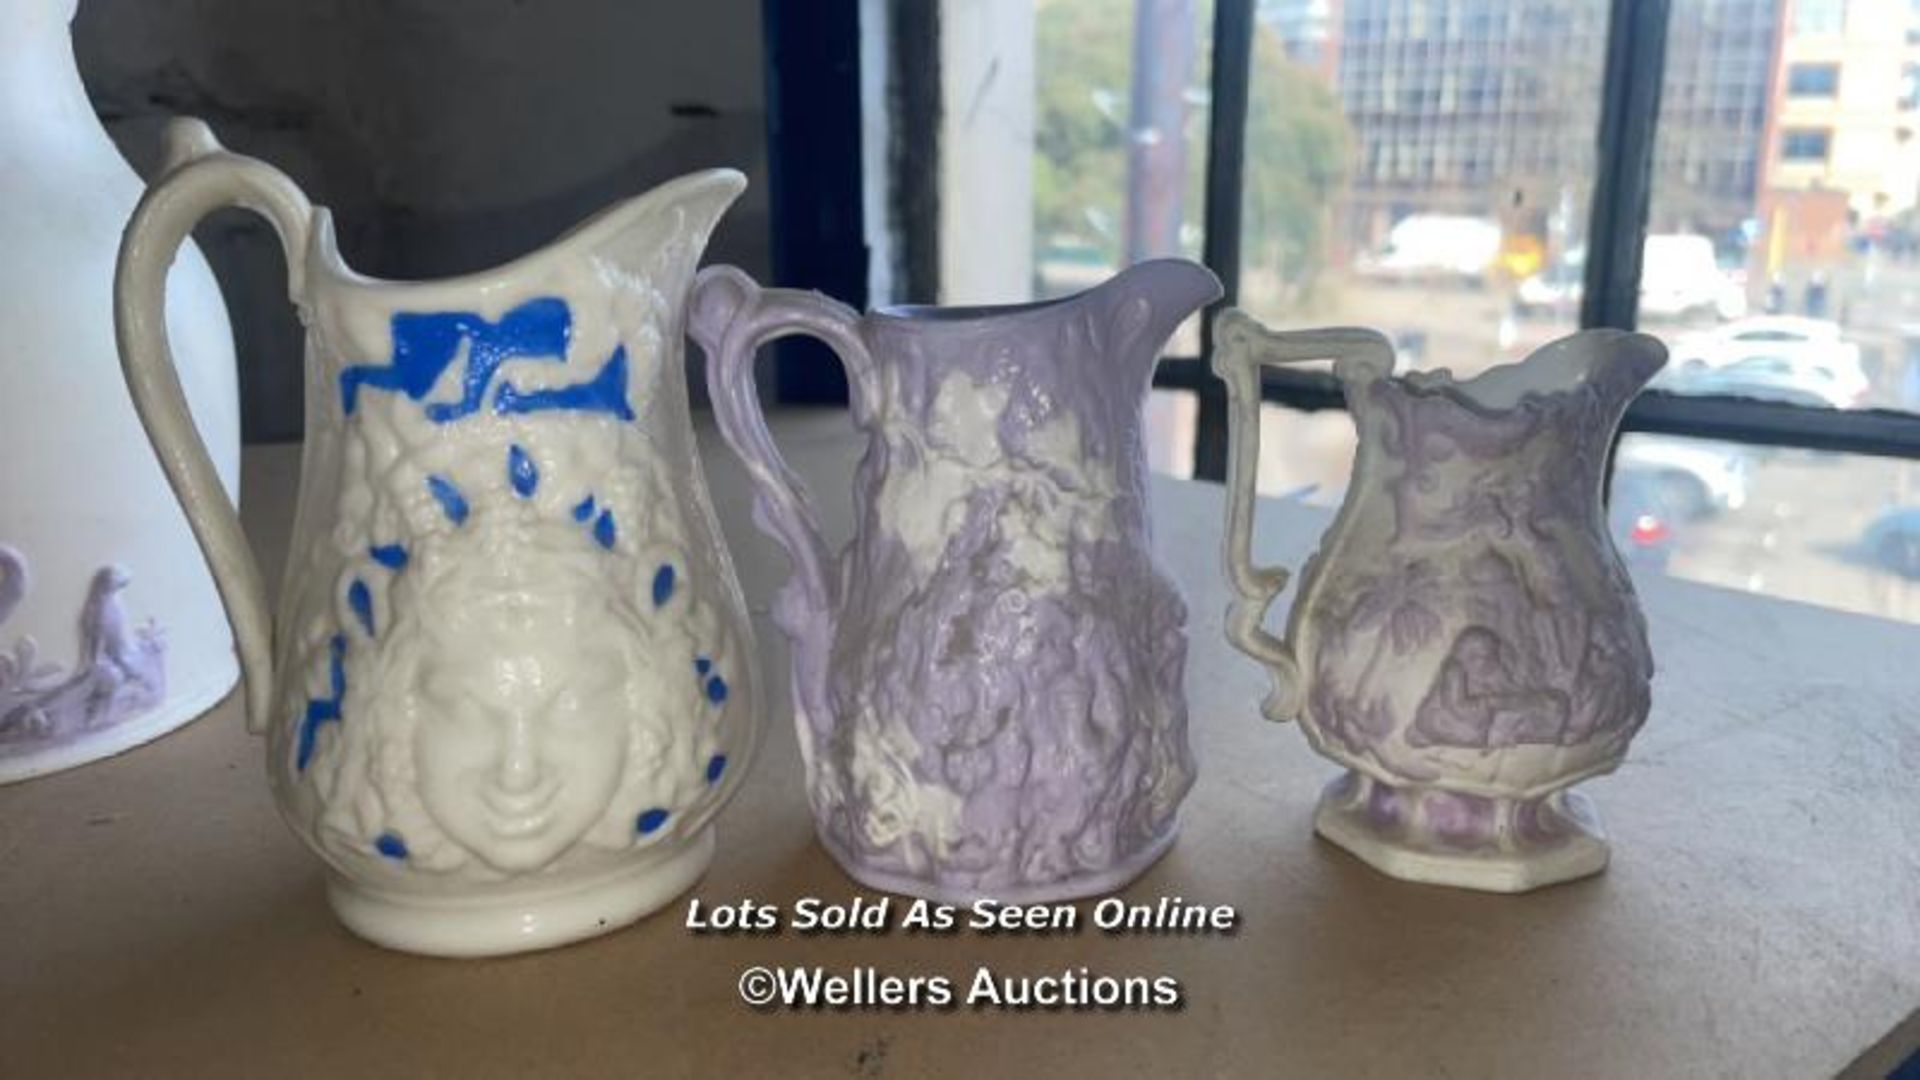 A COLLECTION OF VICTORIAN JUGS, SOME RELIEF MOULDED, SOME WITH LIDS, SOME GRADUATED PAIRS - Image 16 of 17